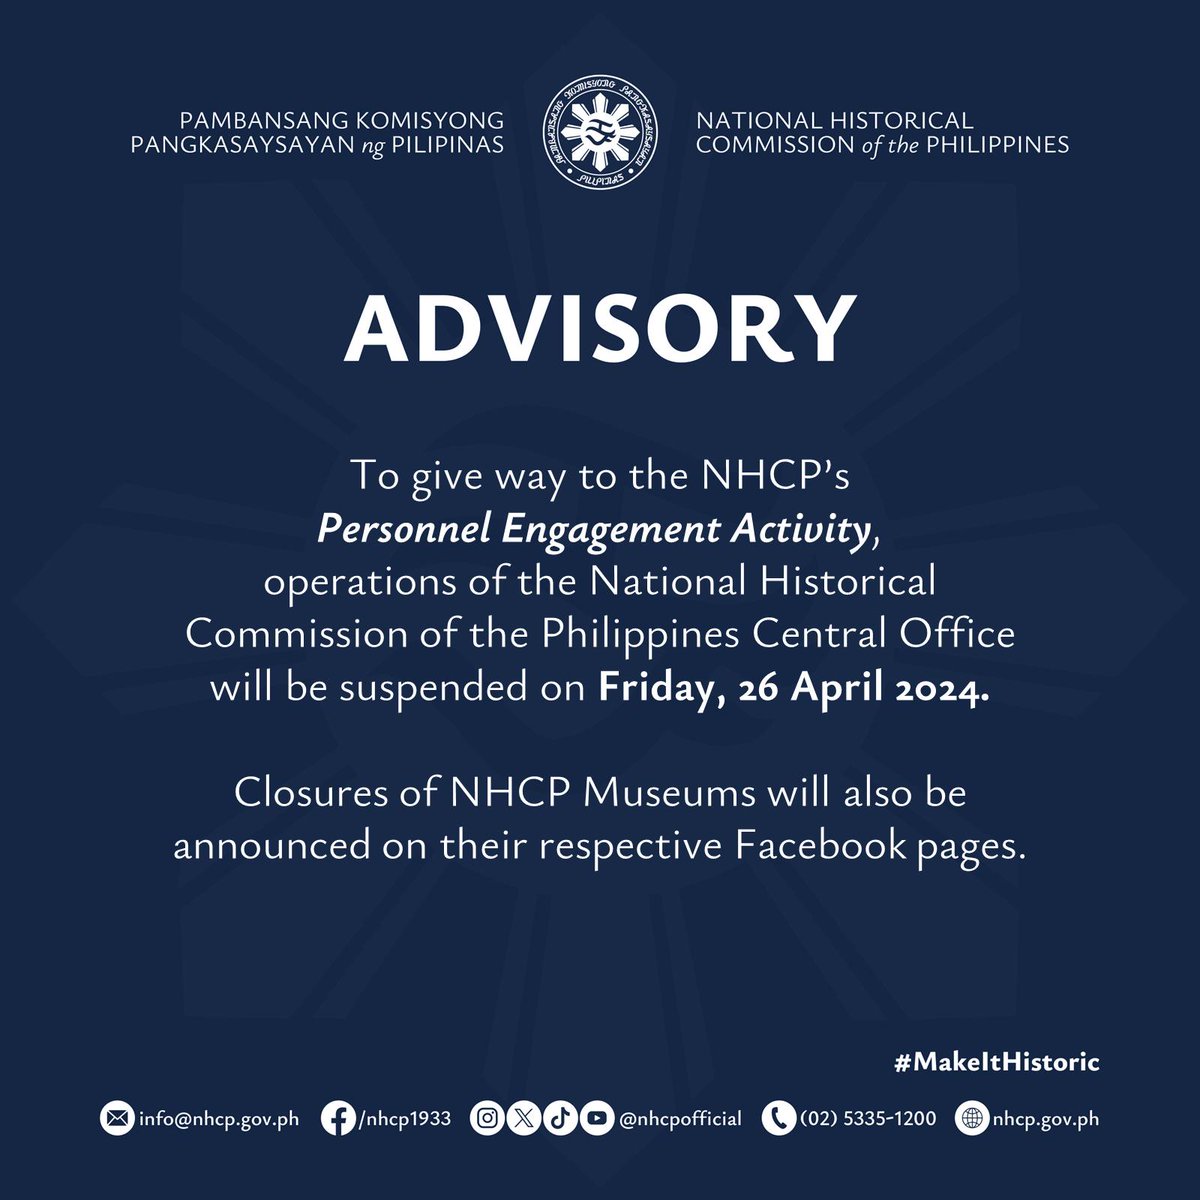 ADVISORY: To give way to the NHCP’s Personnel Engagement Activity, operations of the National Historical Commission of the Philippines Central Office will be suspended on Friday, 26 April 2024.

Closures of NHCP Museums will also be announced on their respective Facebook pages.